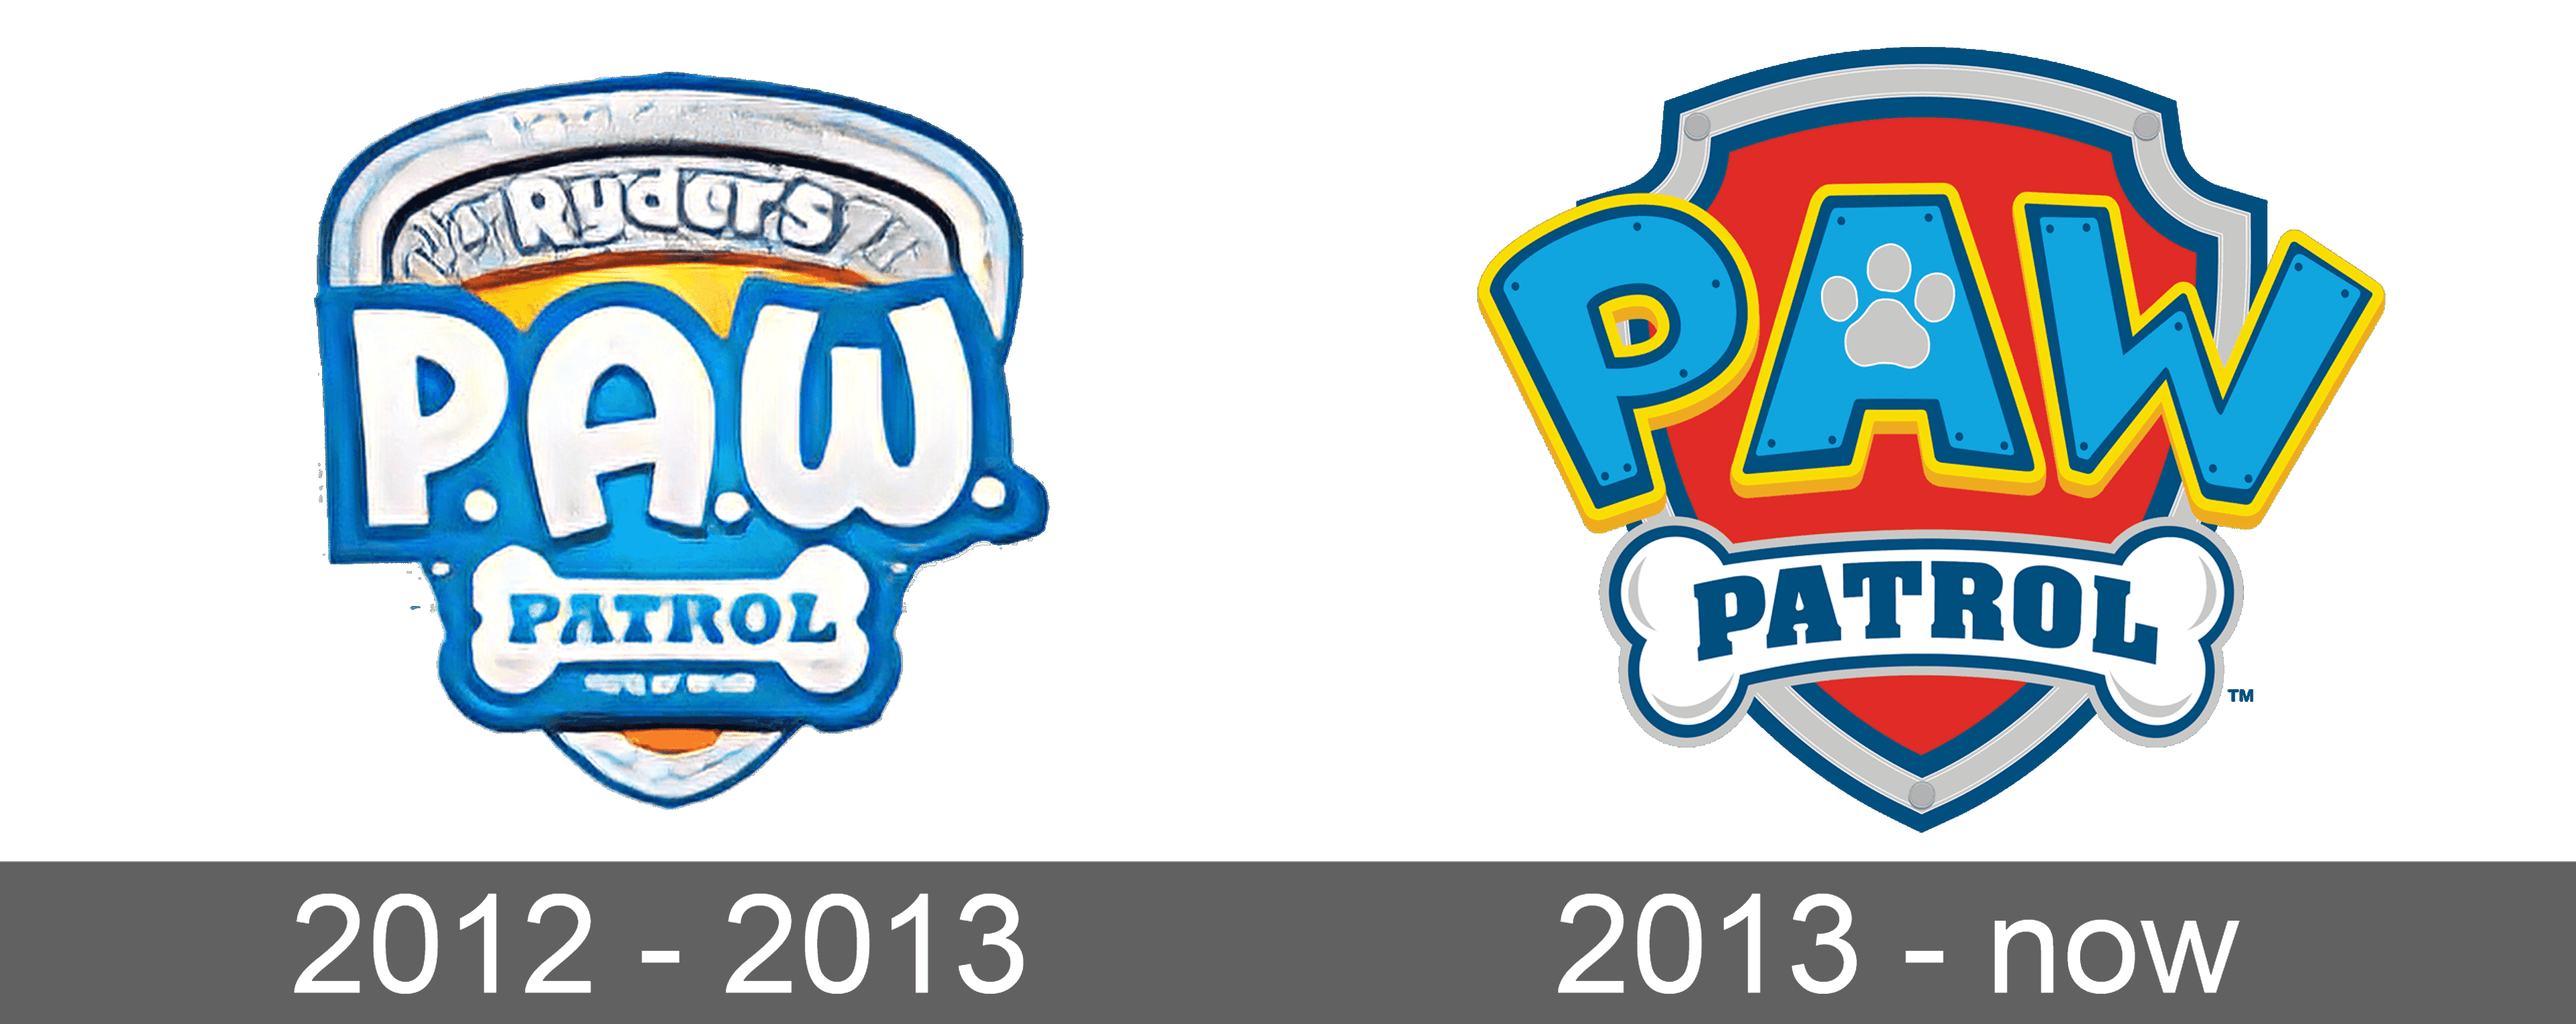 paw-patrol-logo-and-symbol-meaning-history-sign